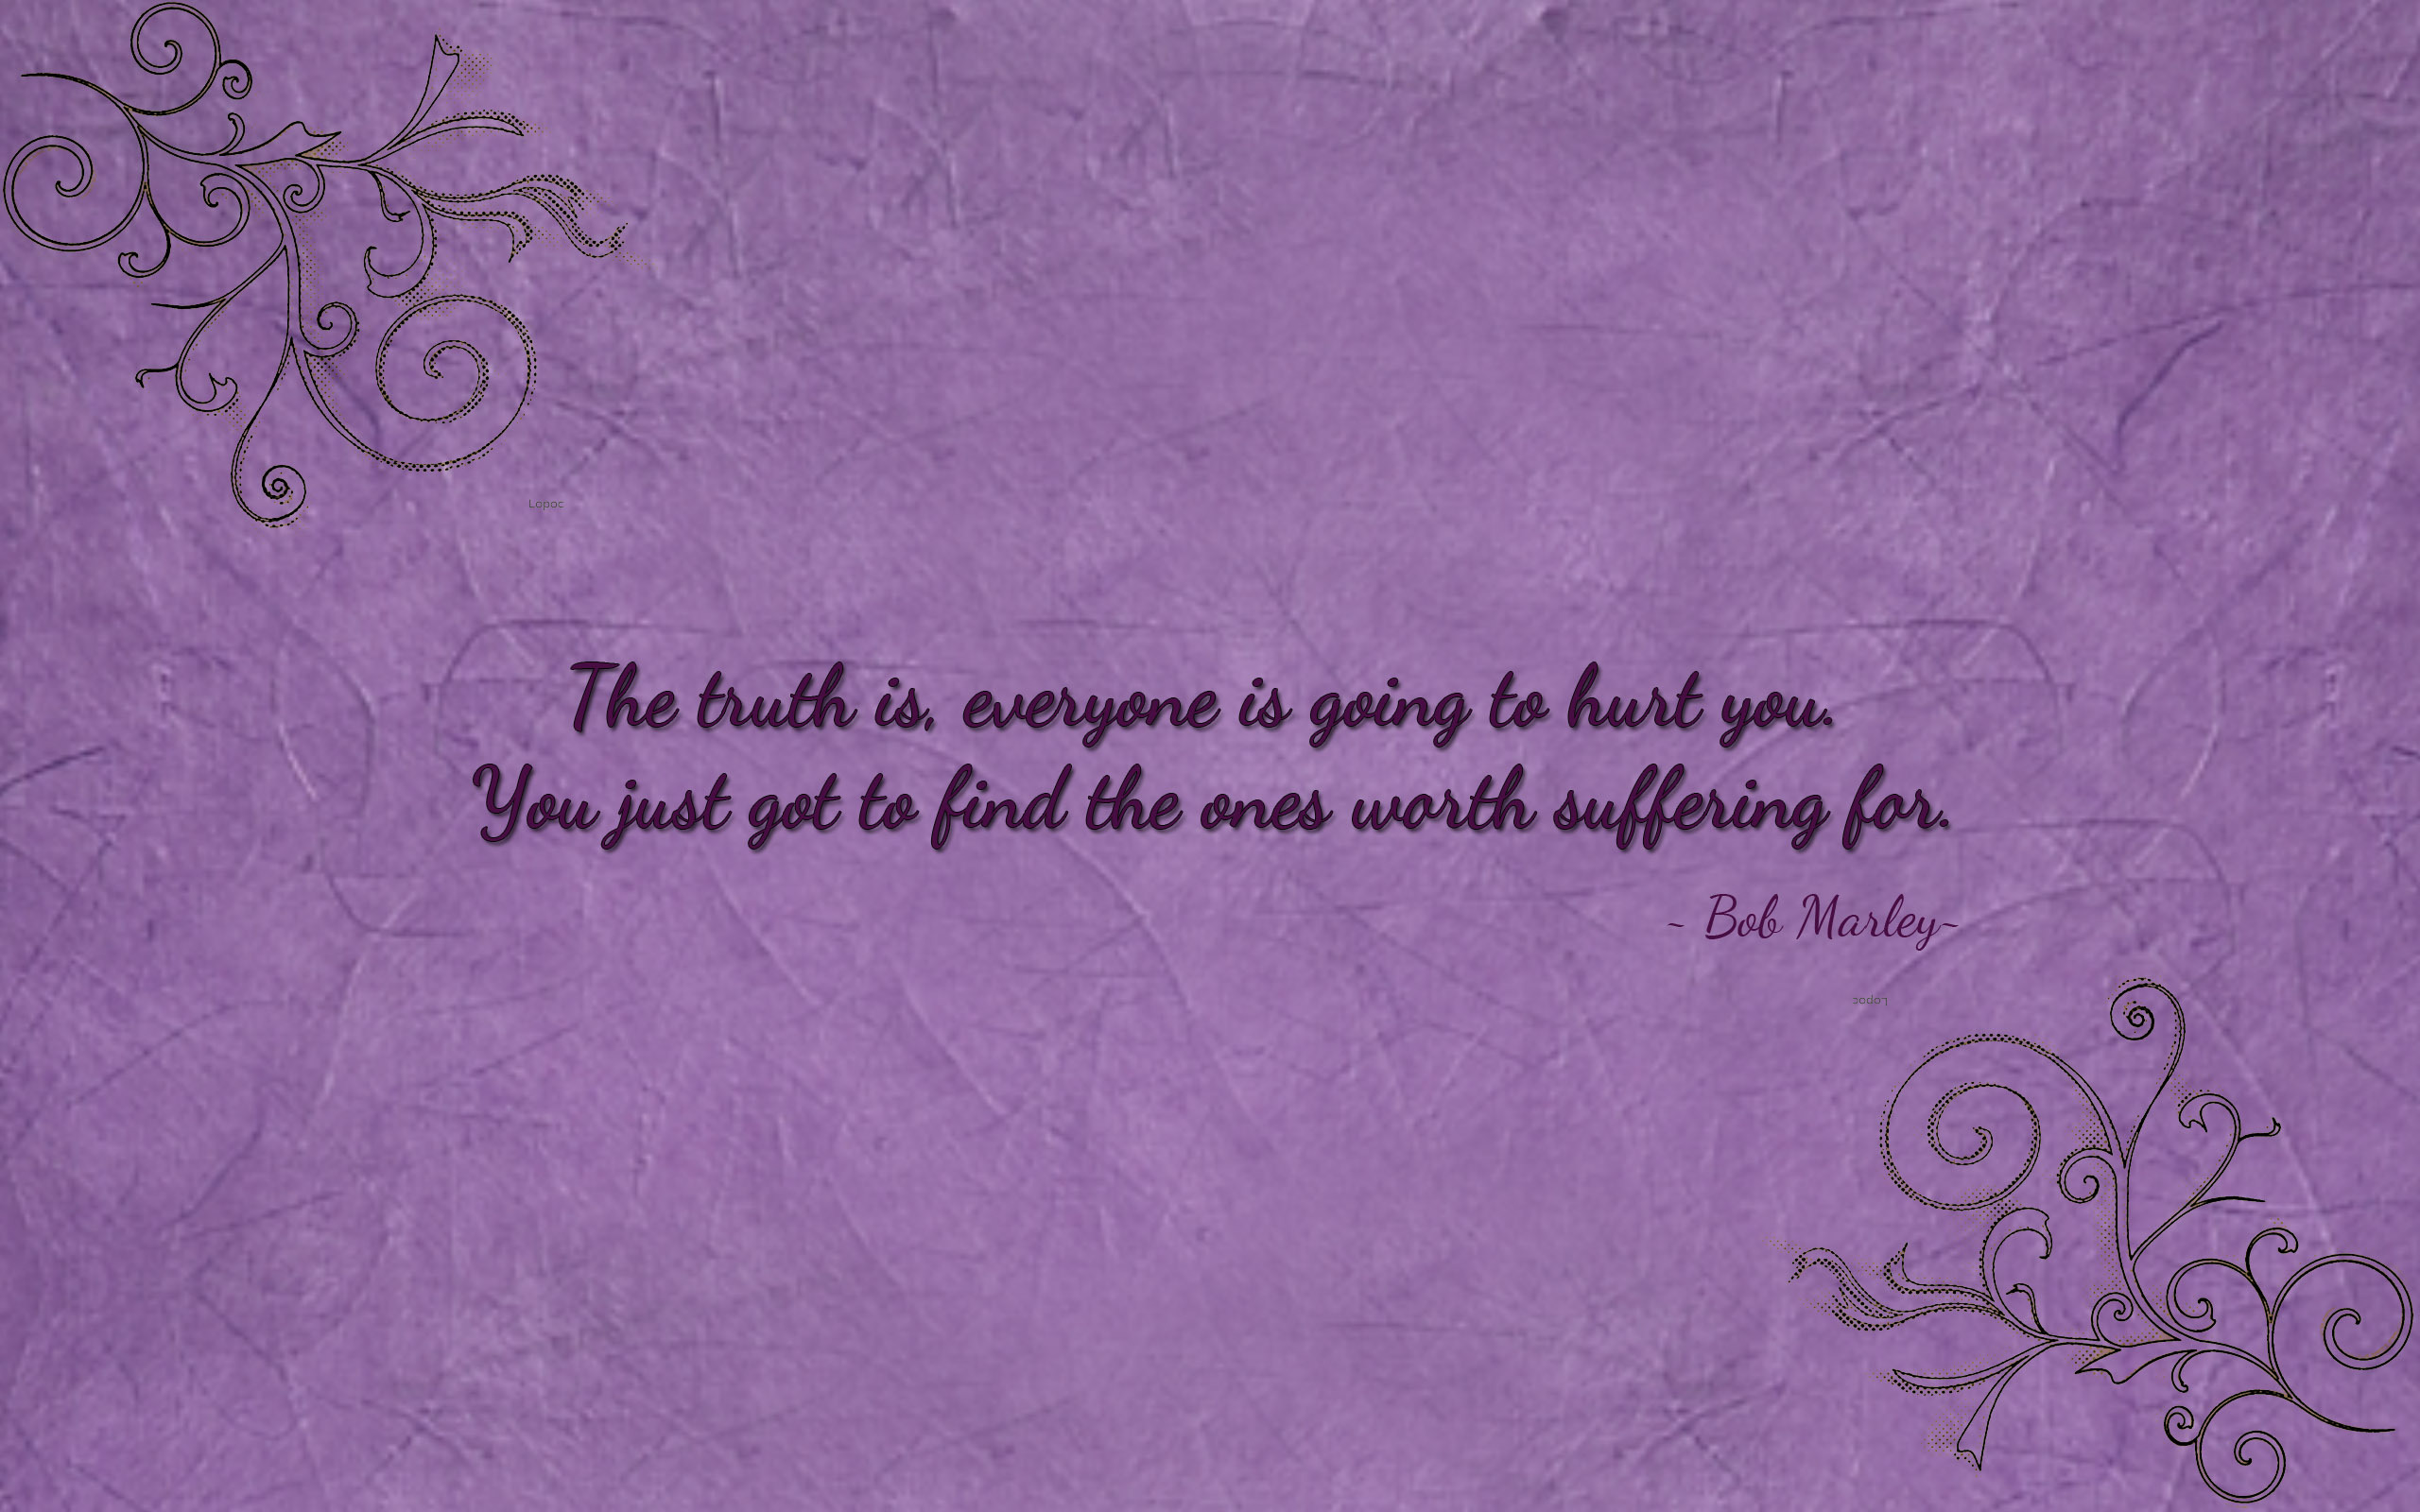 The truth is... wallpaper - #51